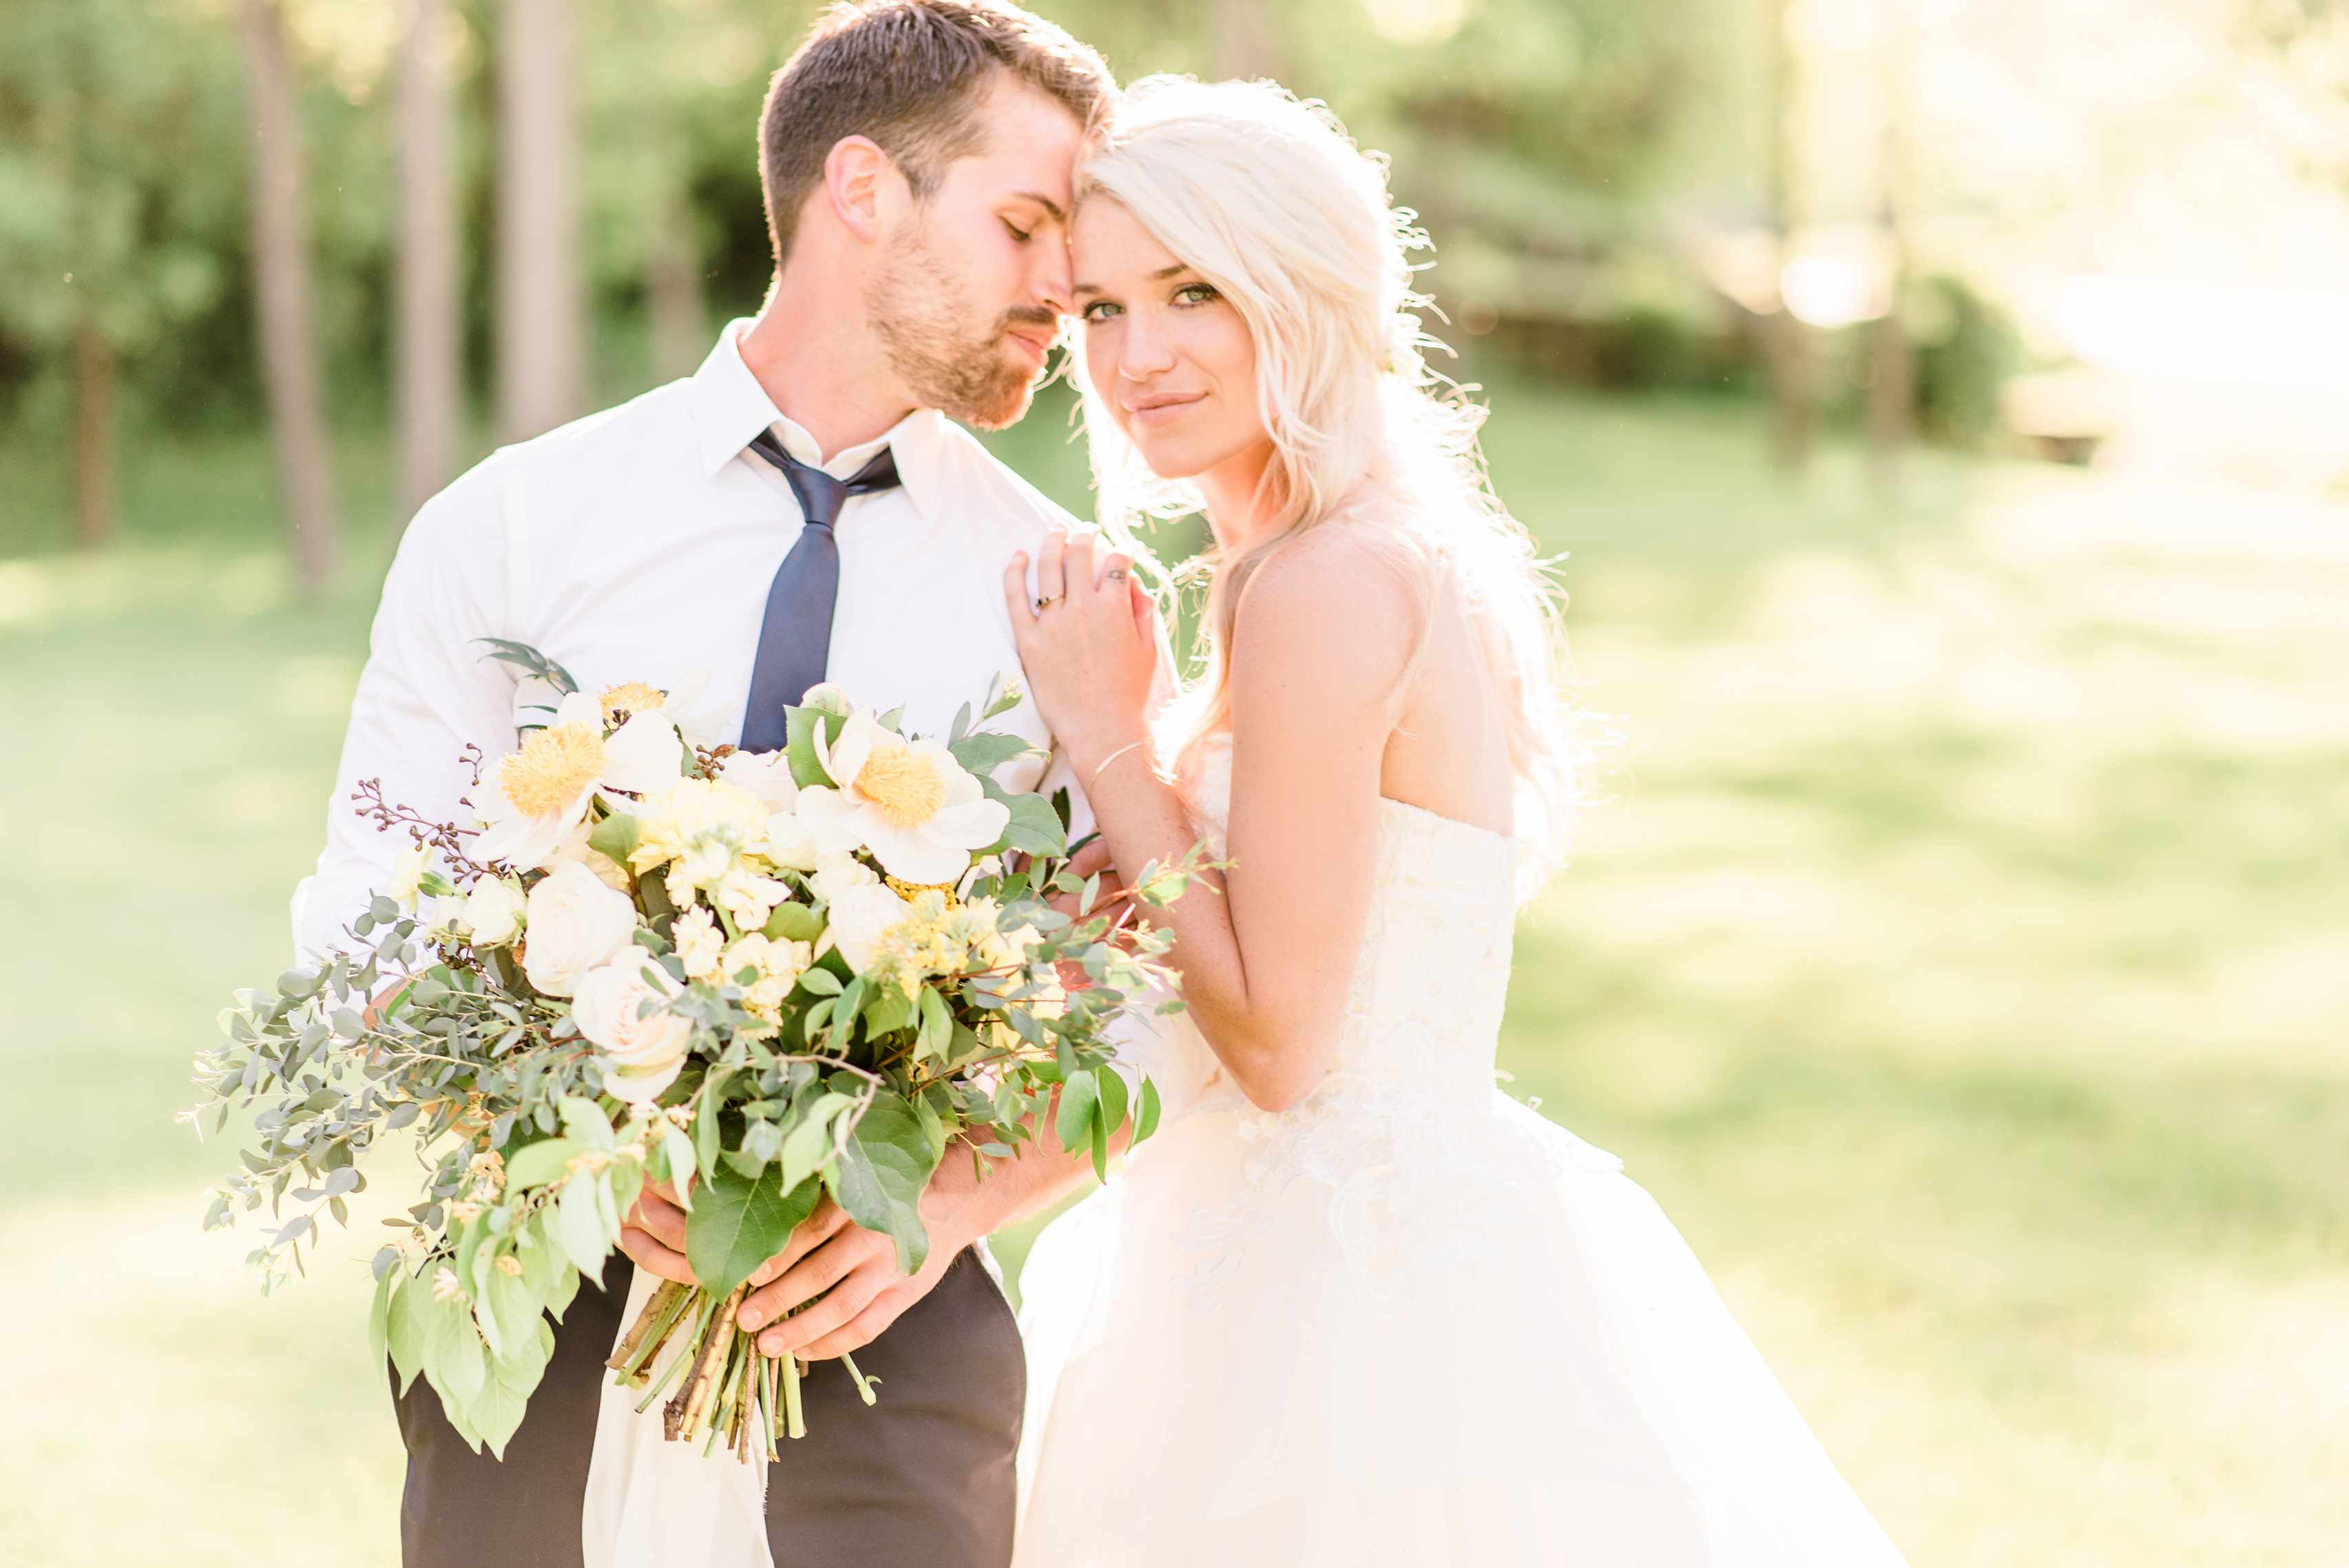 Dainty Bohemian Styled Wedding {Featured} - Bailey Elle Photography